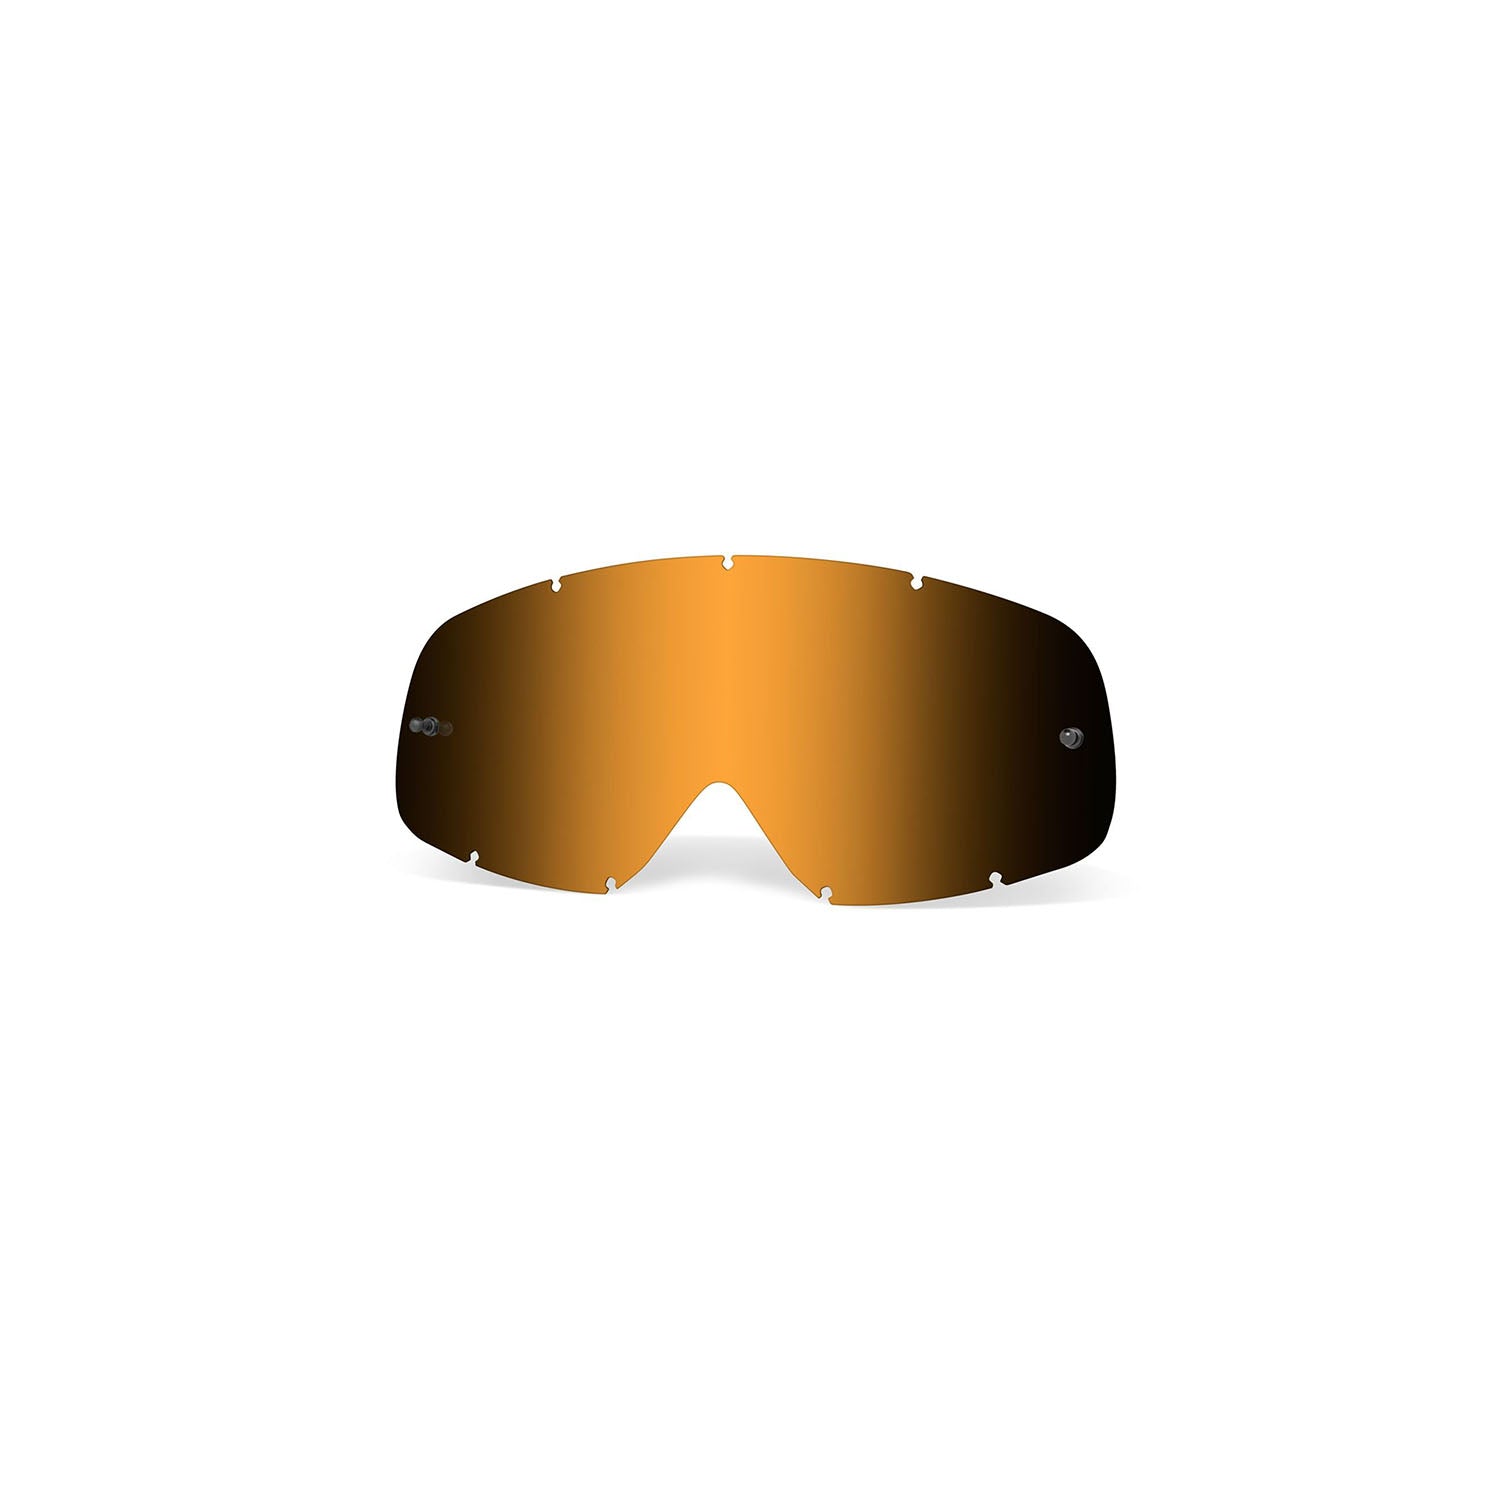 Oakley O Frame MX Replacement Lens in Black Iridium Color